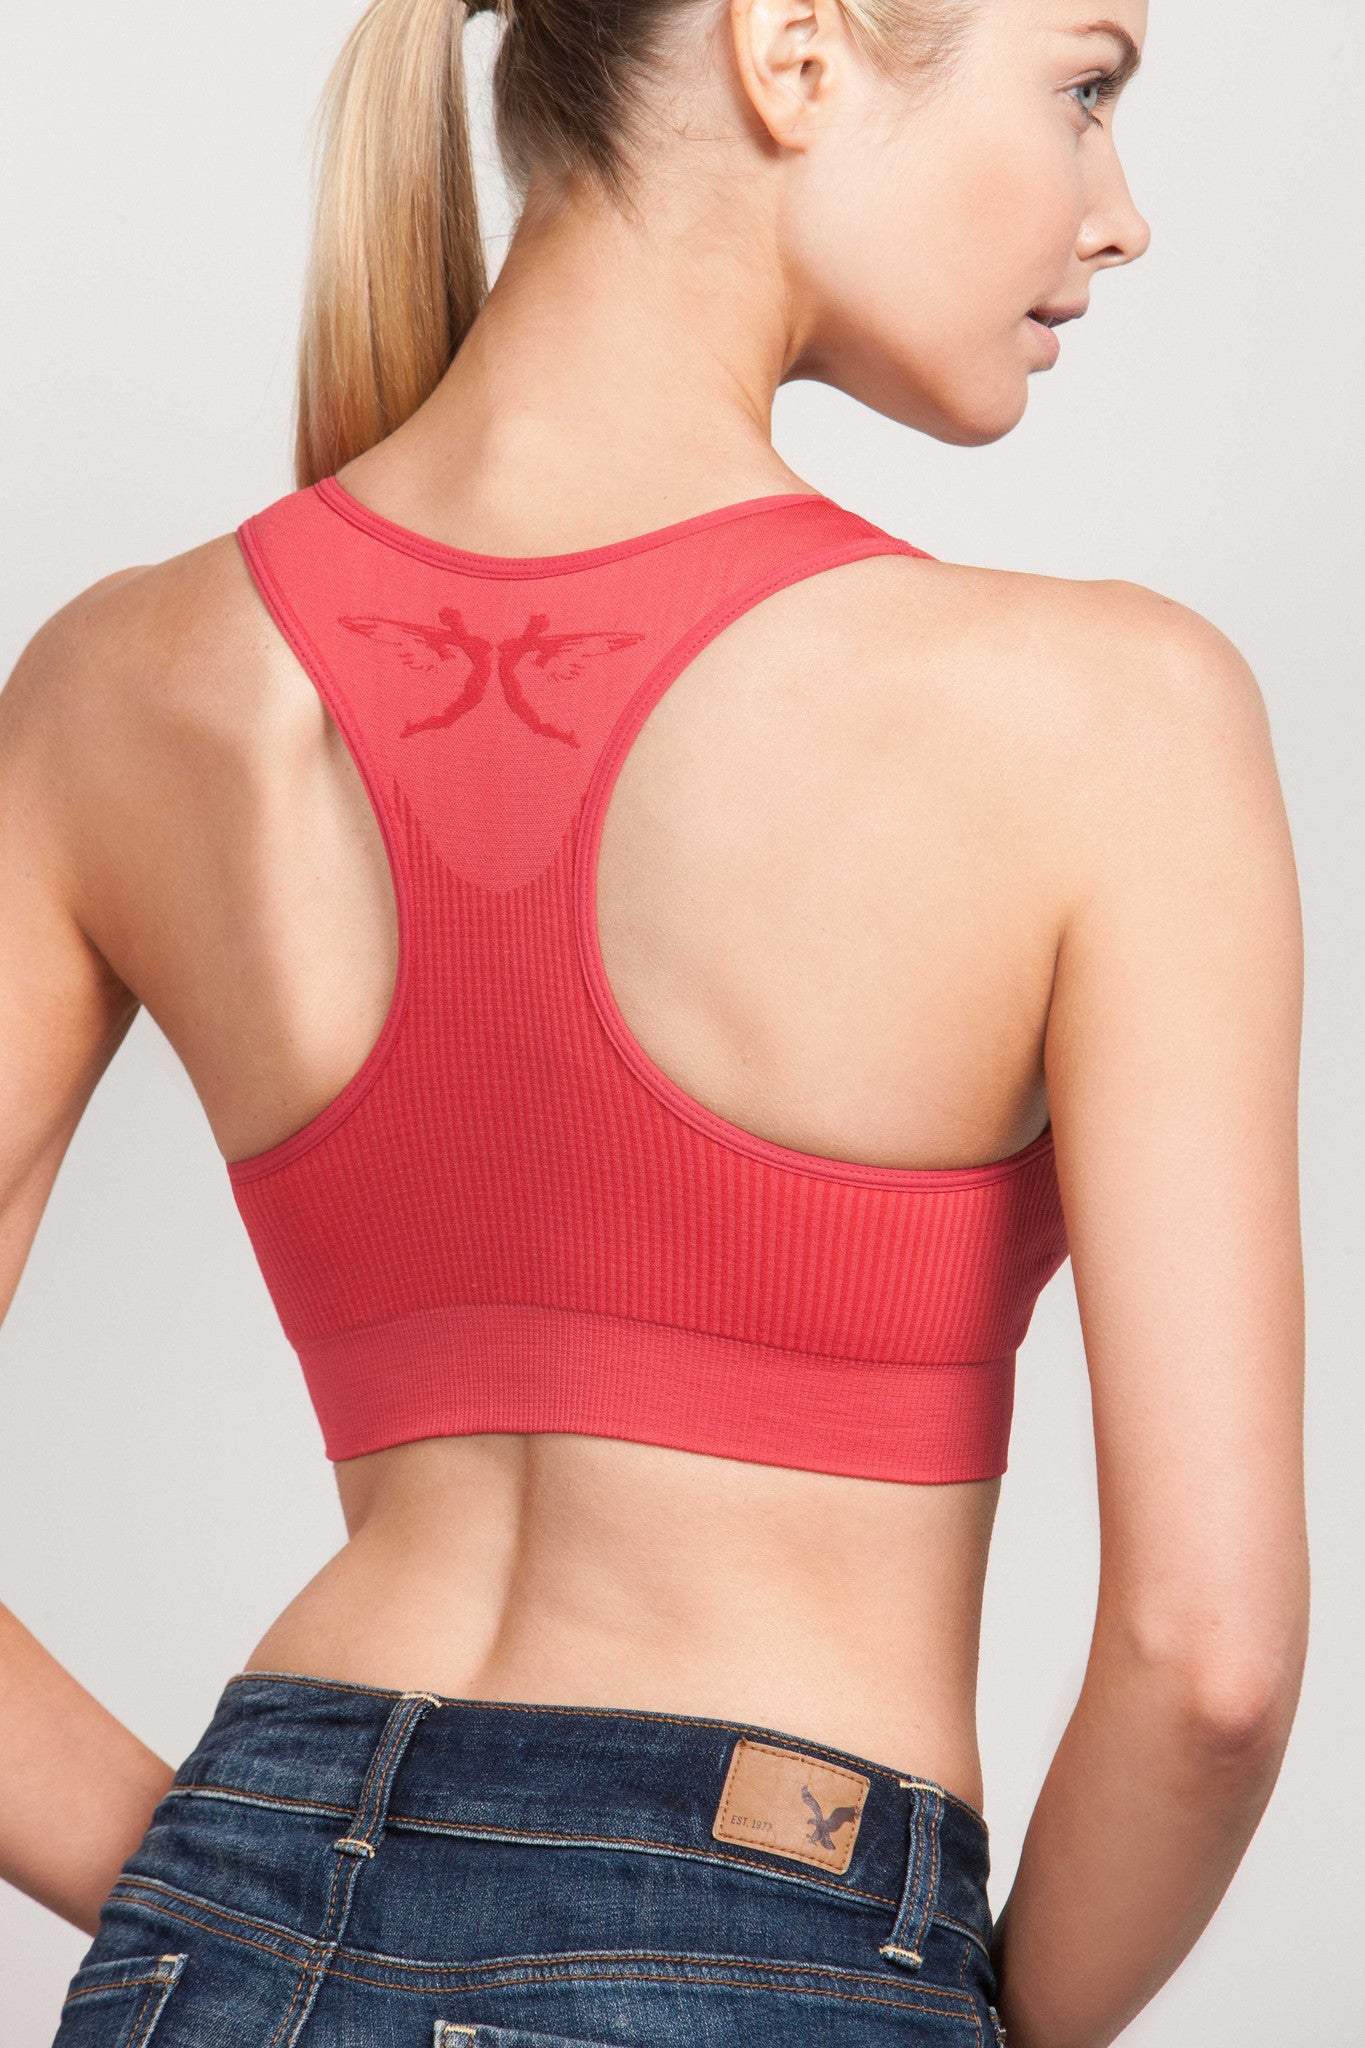 Bra whisperer' reveals how exercising without a sports bra can cause  serious damage to your breasts